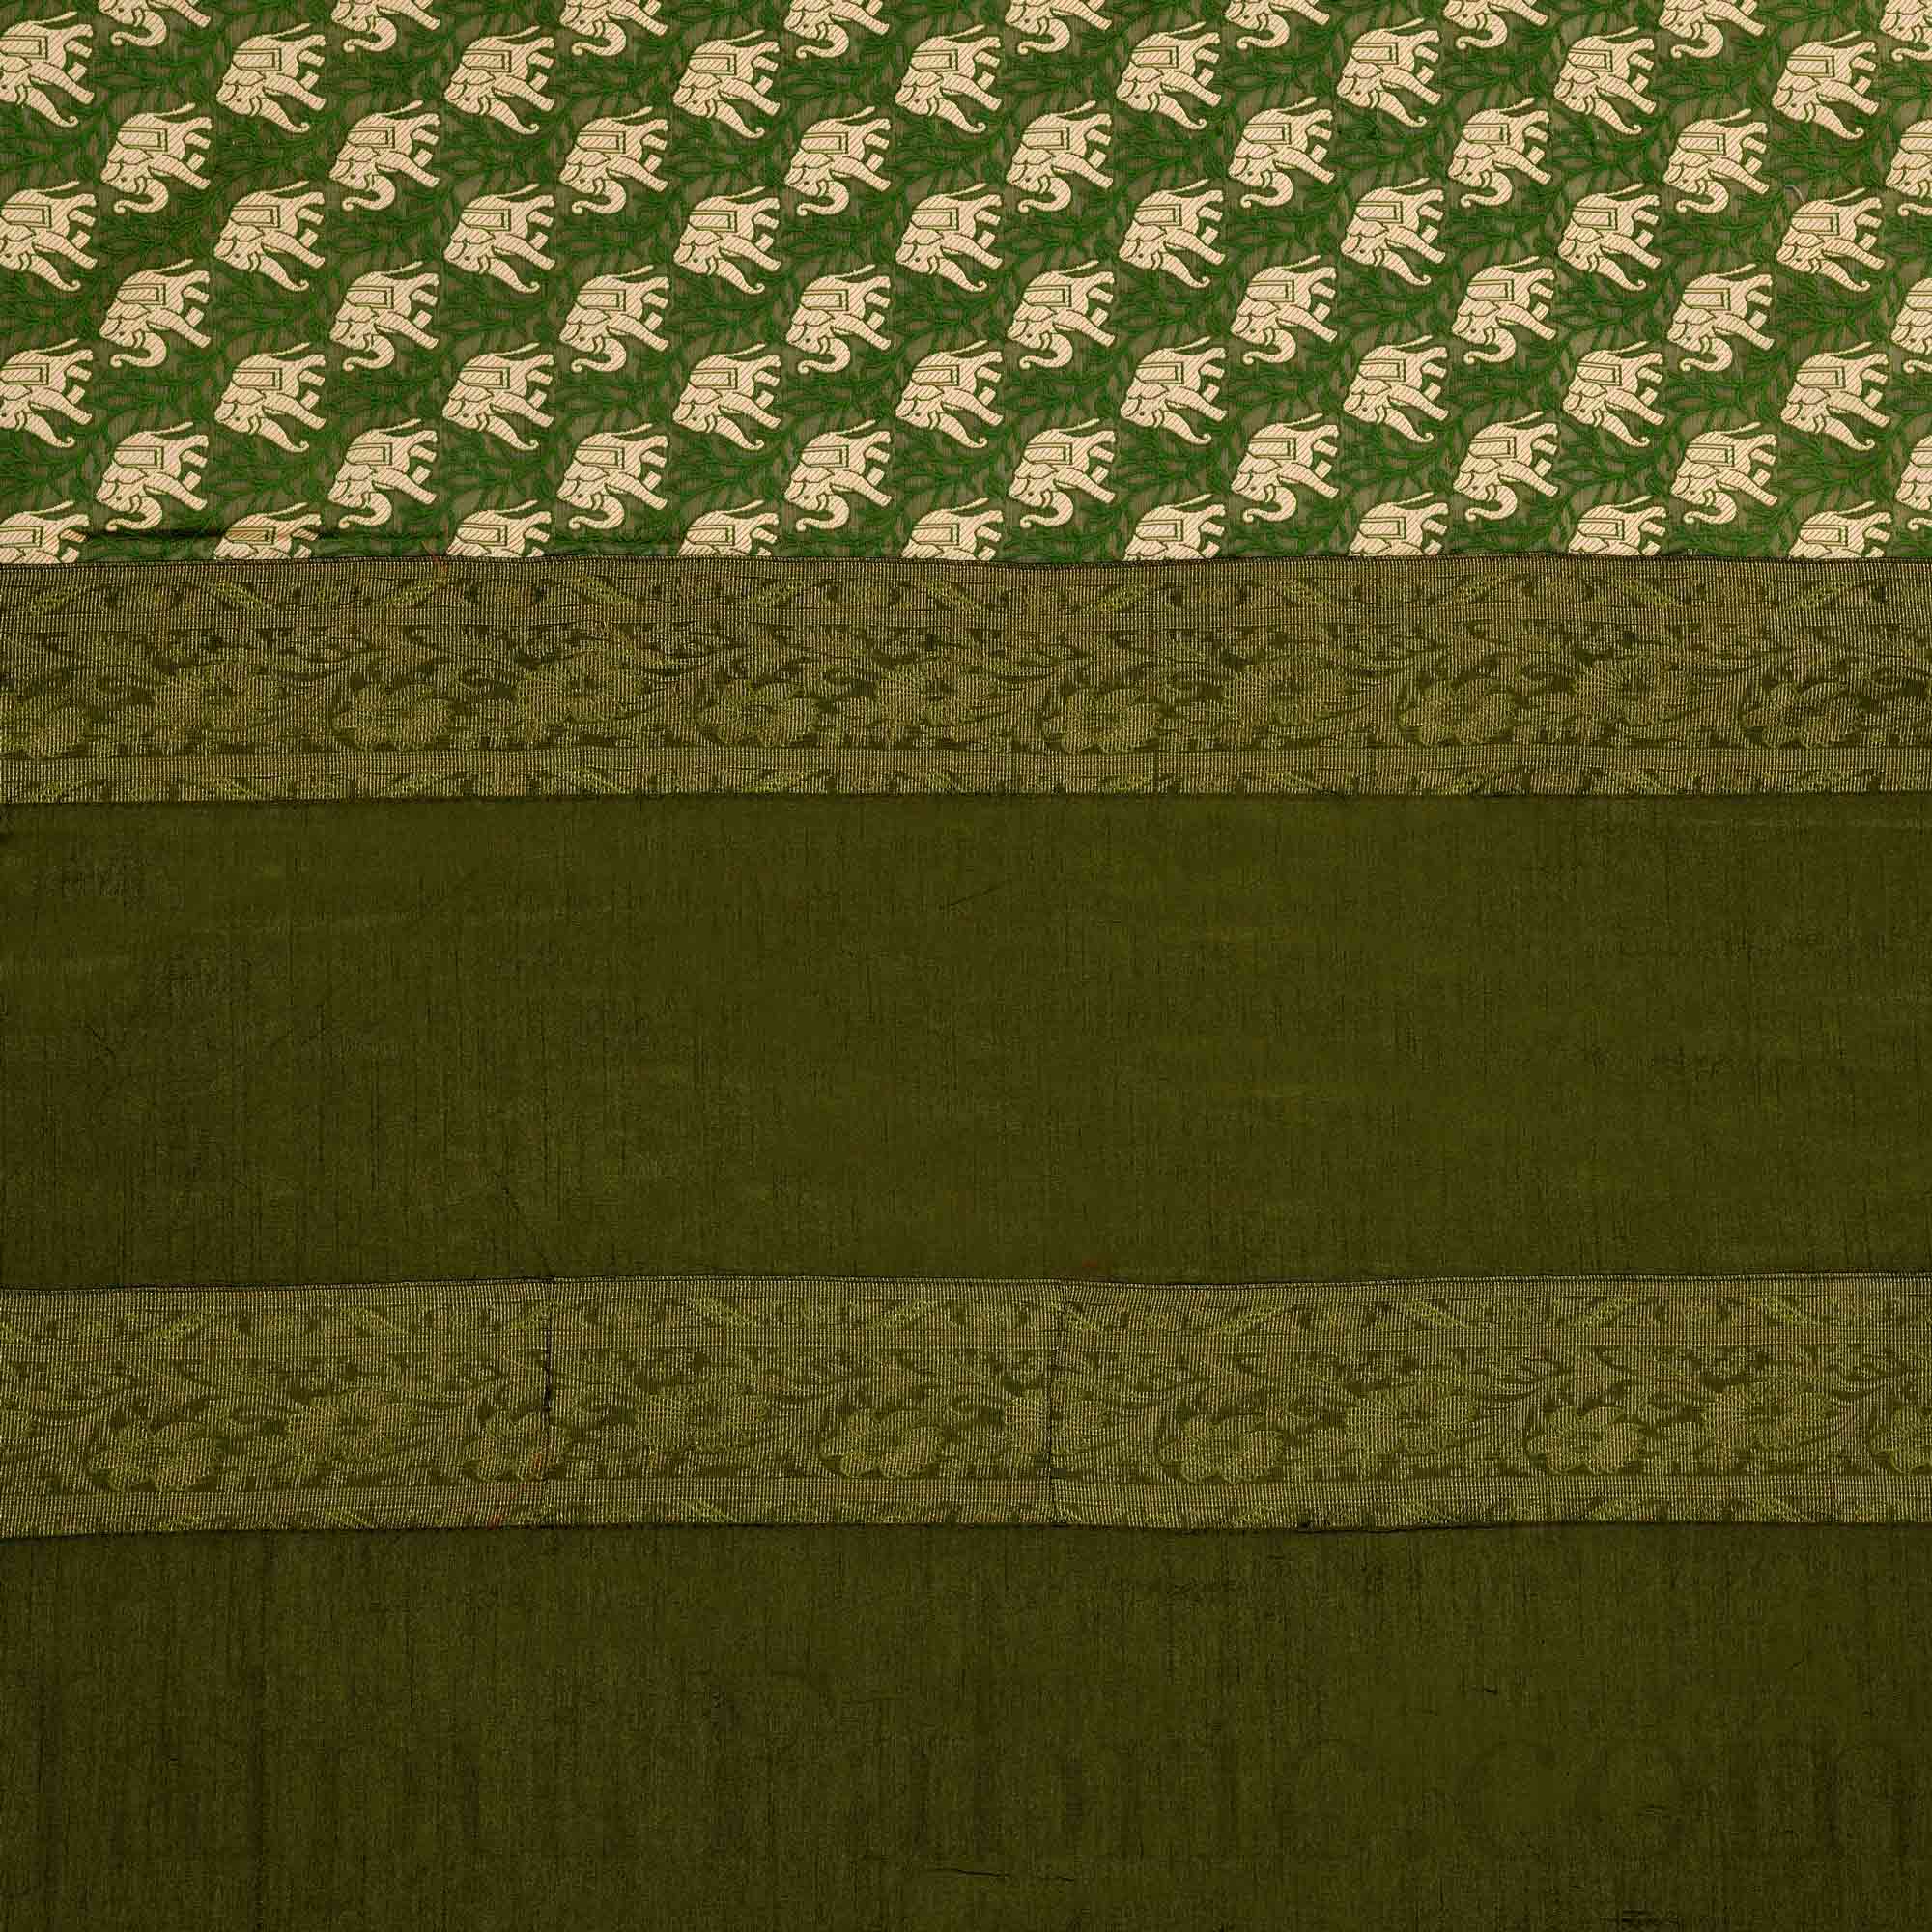 Green Rajasthani Zari Embroidered Lace Work Silk Double Bed Sheet